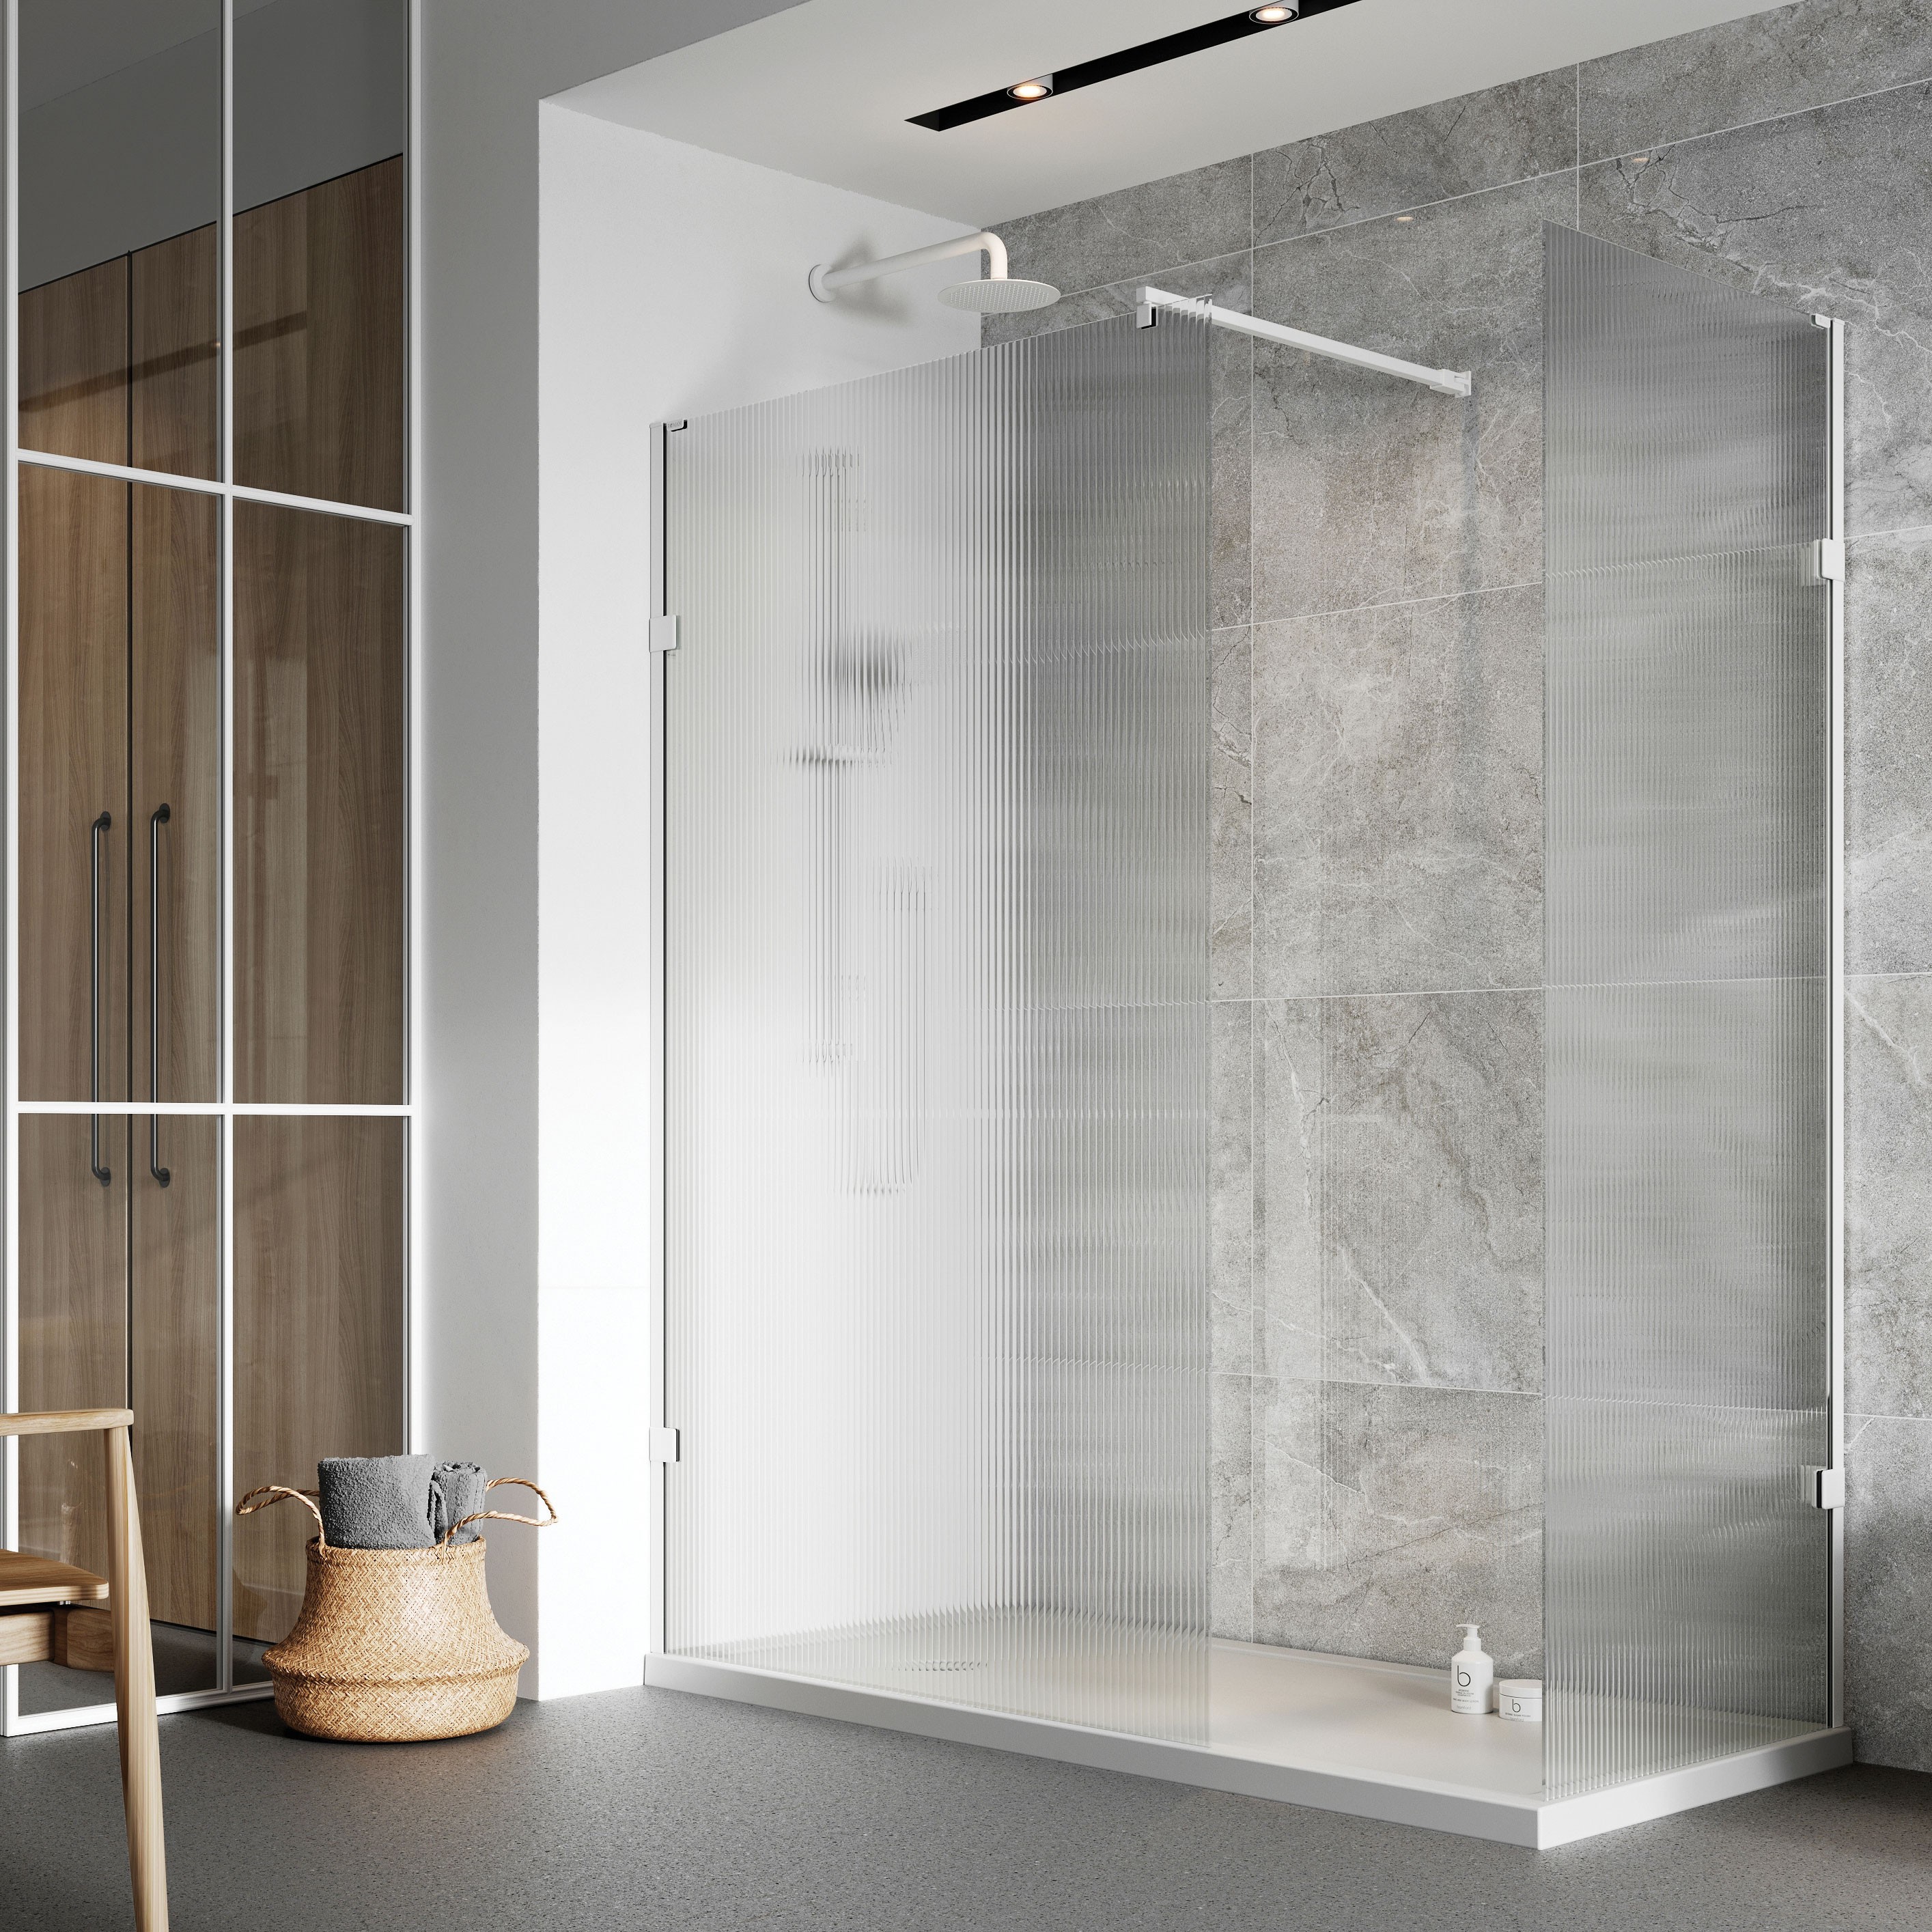 Roman Liberty Corner Wetroom Panel 1157mm Fluted Glass Matt White [KLCP12FW] [WETROOM PANEL ONLY - BRACE BARS/FIXINGS NOT INCLUDED]